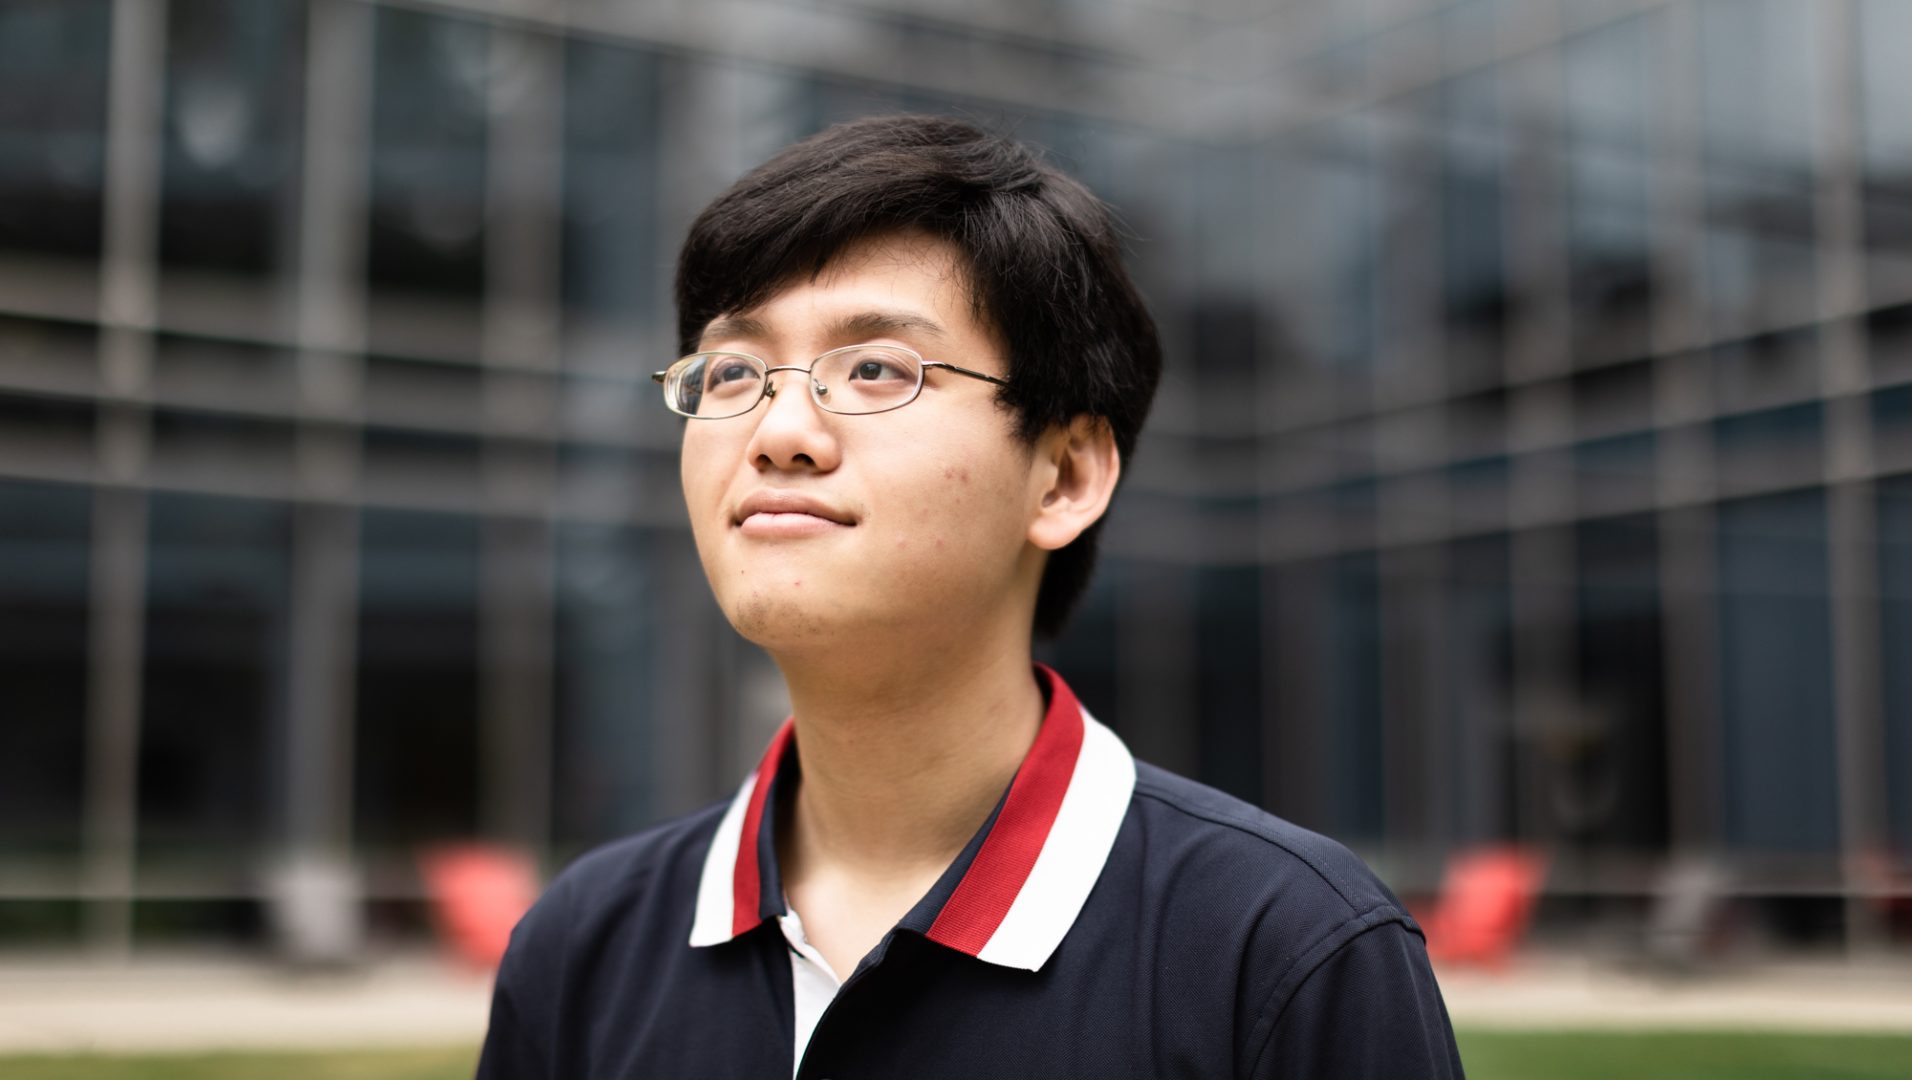 An Ho-Ngoc Nguyen sits for a portrait at George Mason University, where he completed his undergraduate degree and is currently pursuing his Masters.